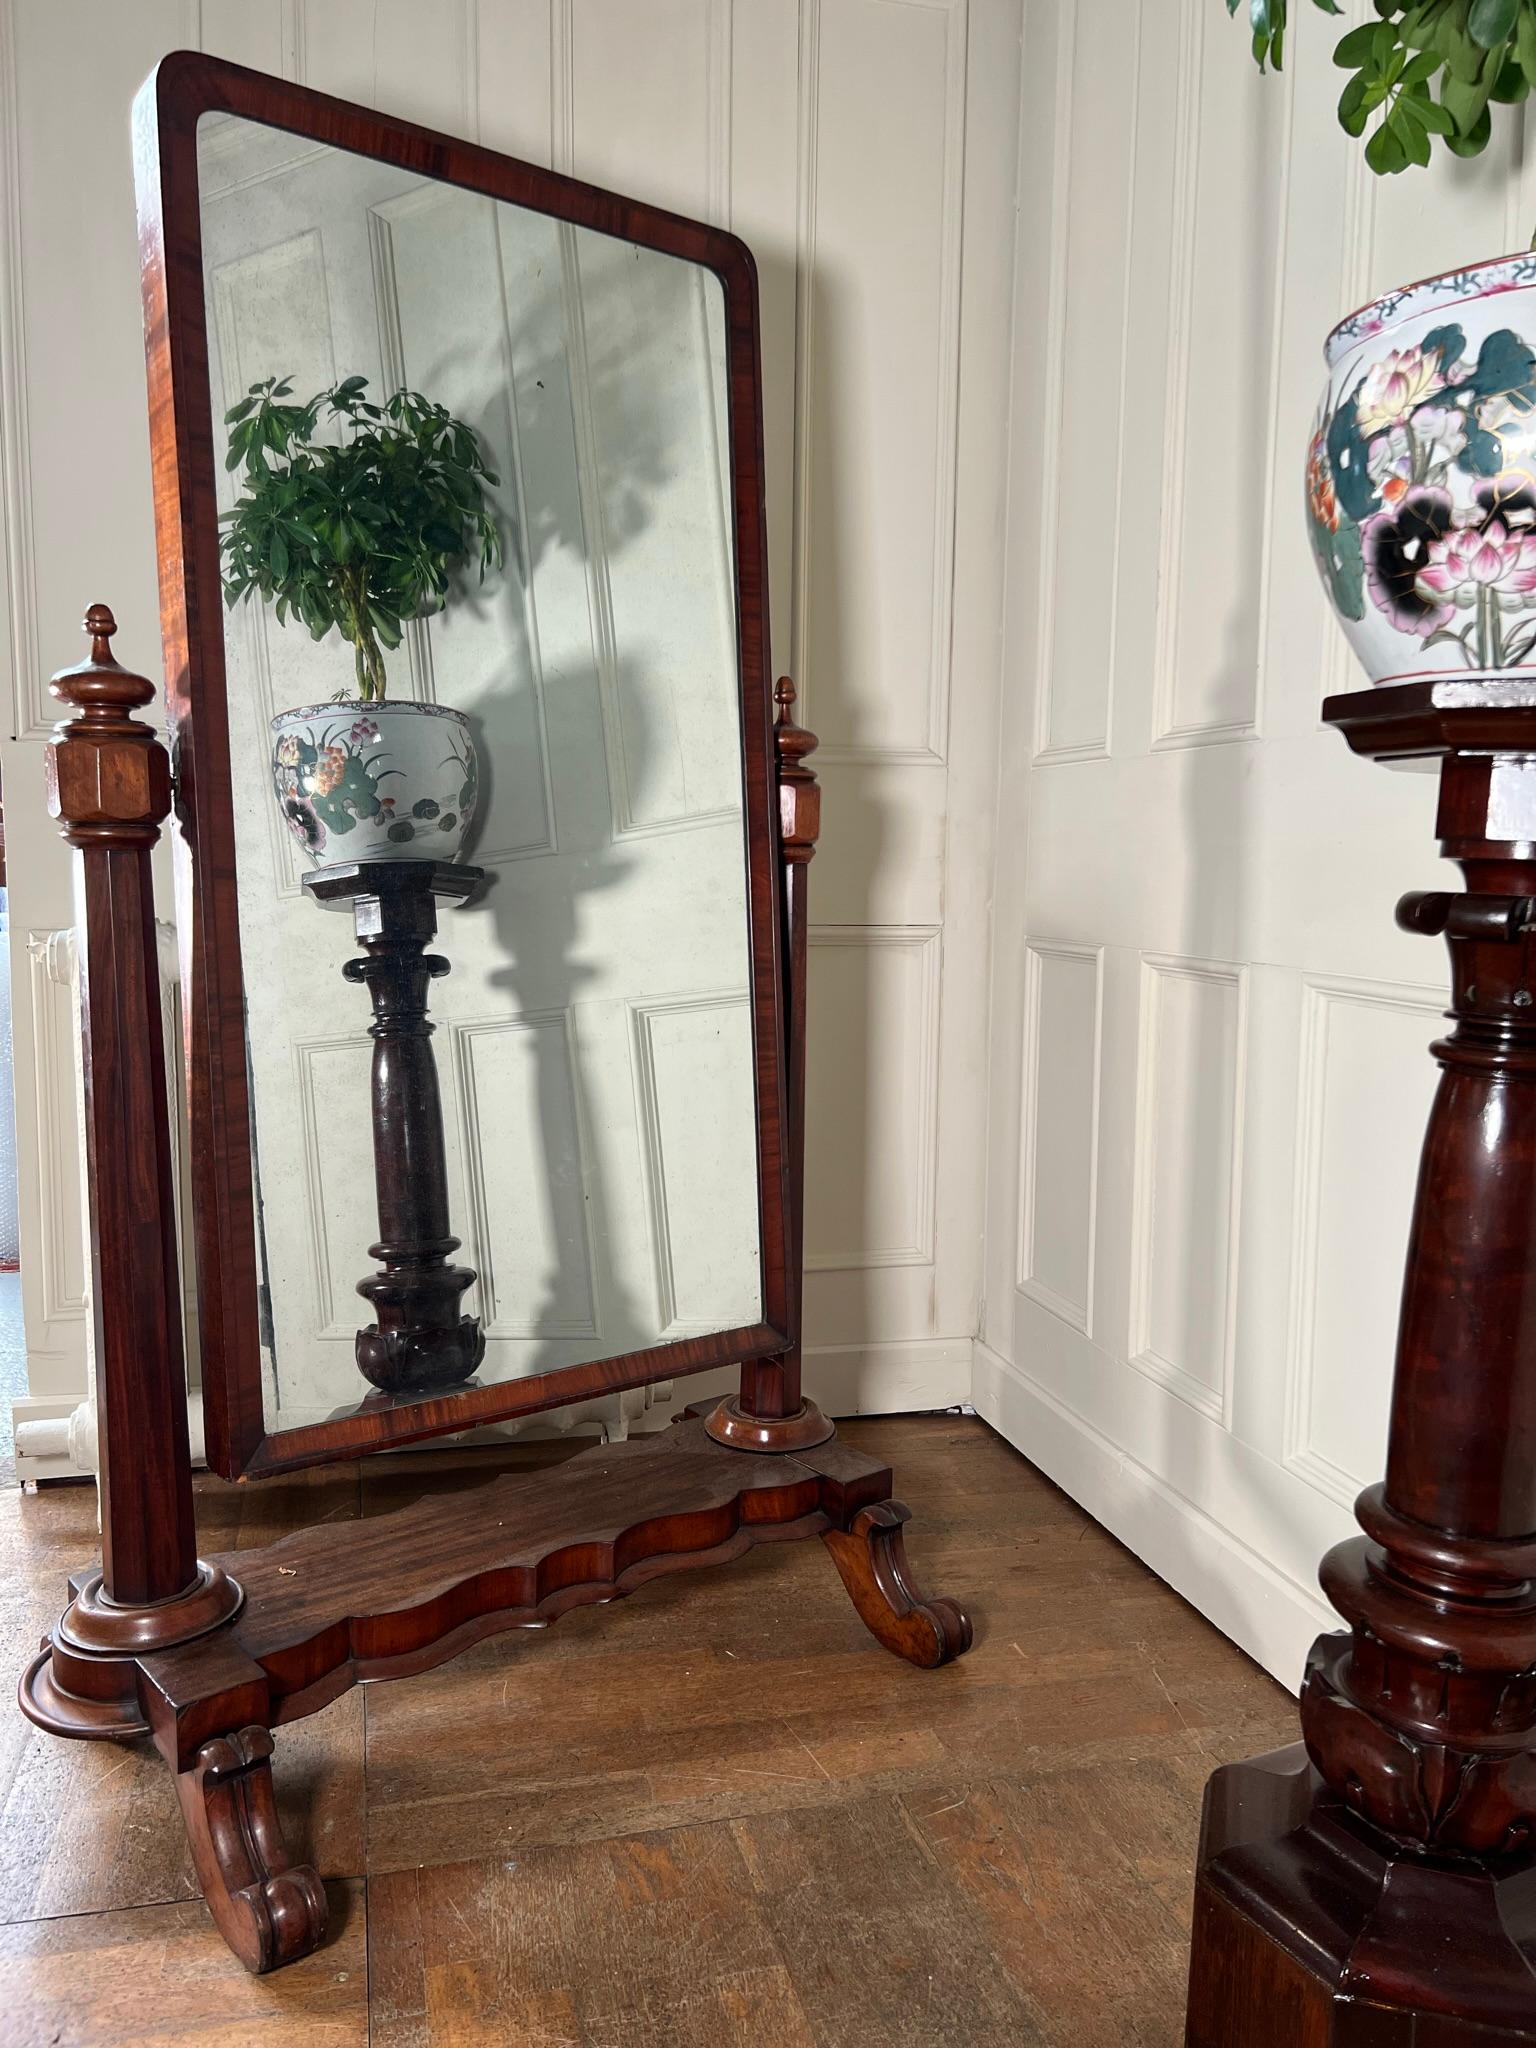 Large 19th century Cheval dressing mirror of county house proportions.

Nice foxing to the mirror plate and a great looking sturdy mahogany frame.

Measurements: 160cm h x 96cm w stand / 66.5cm w mirror x 65cm d stand

(measurements are approximate